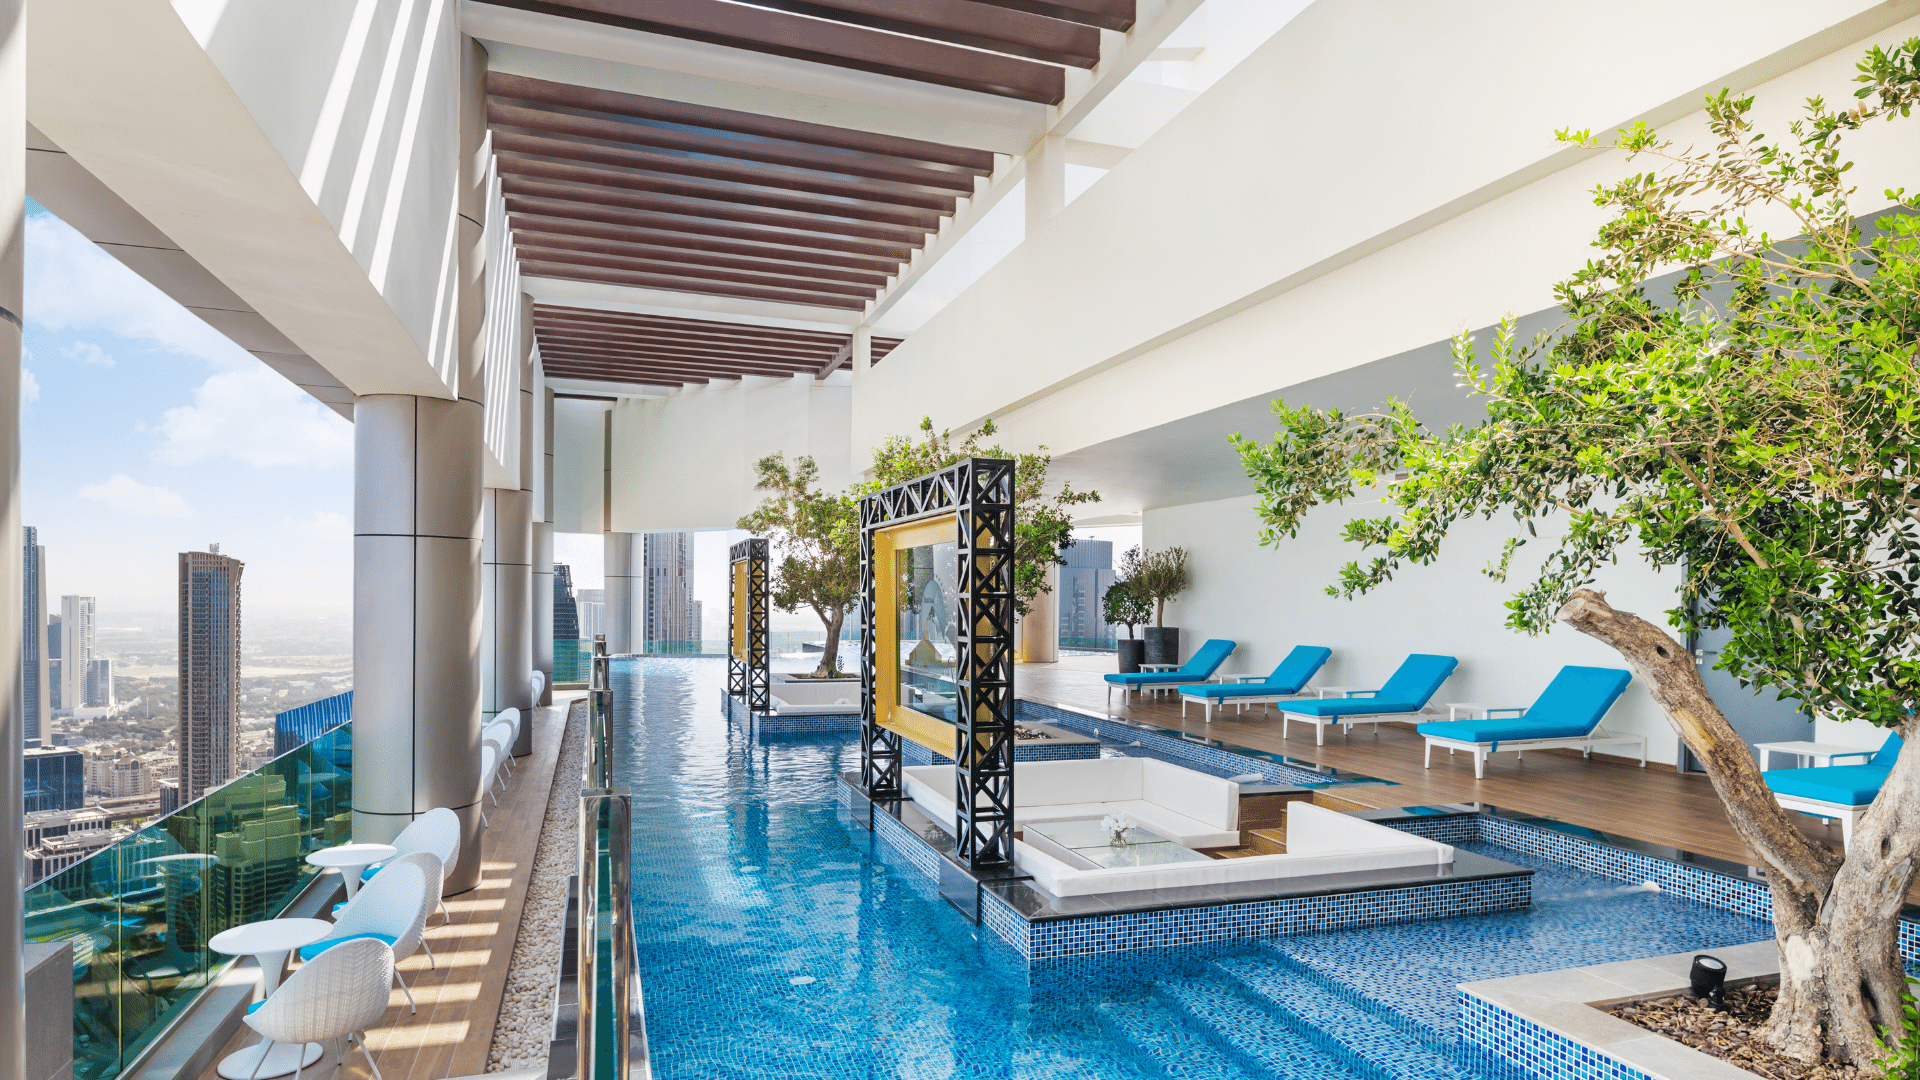 Indoor Malibu Pool with loungers at Paramount Hotel Midtown